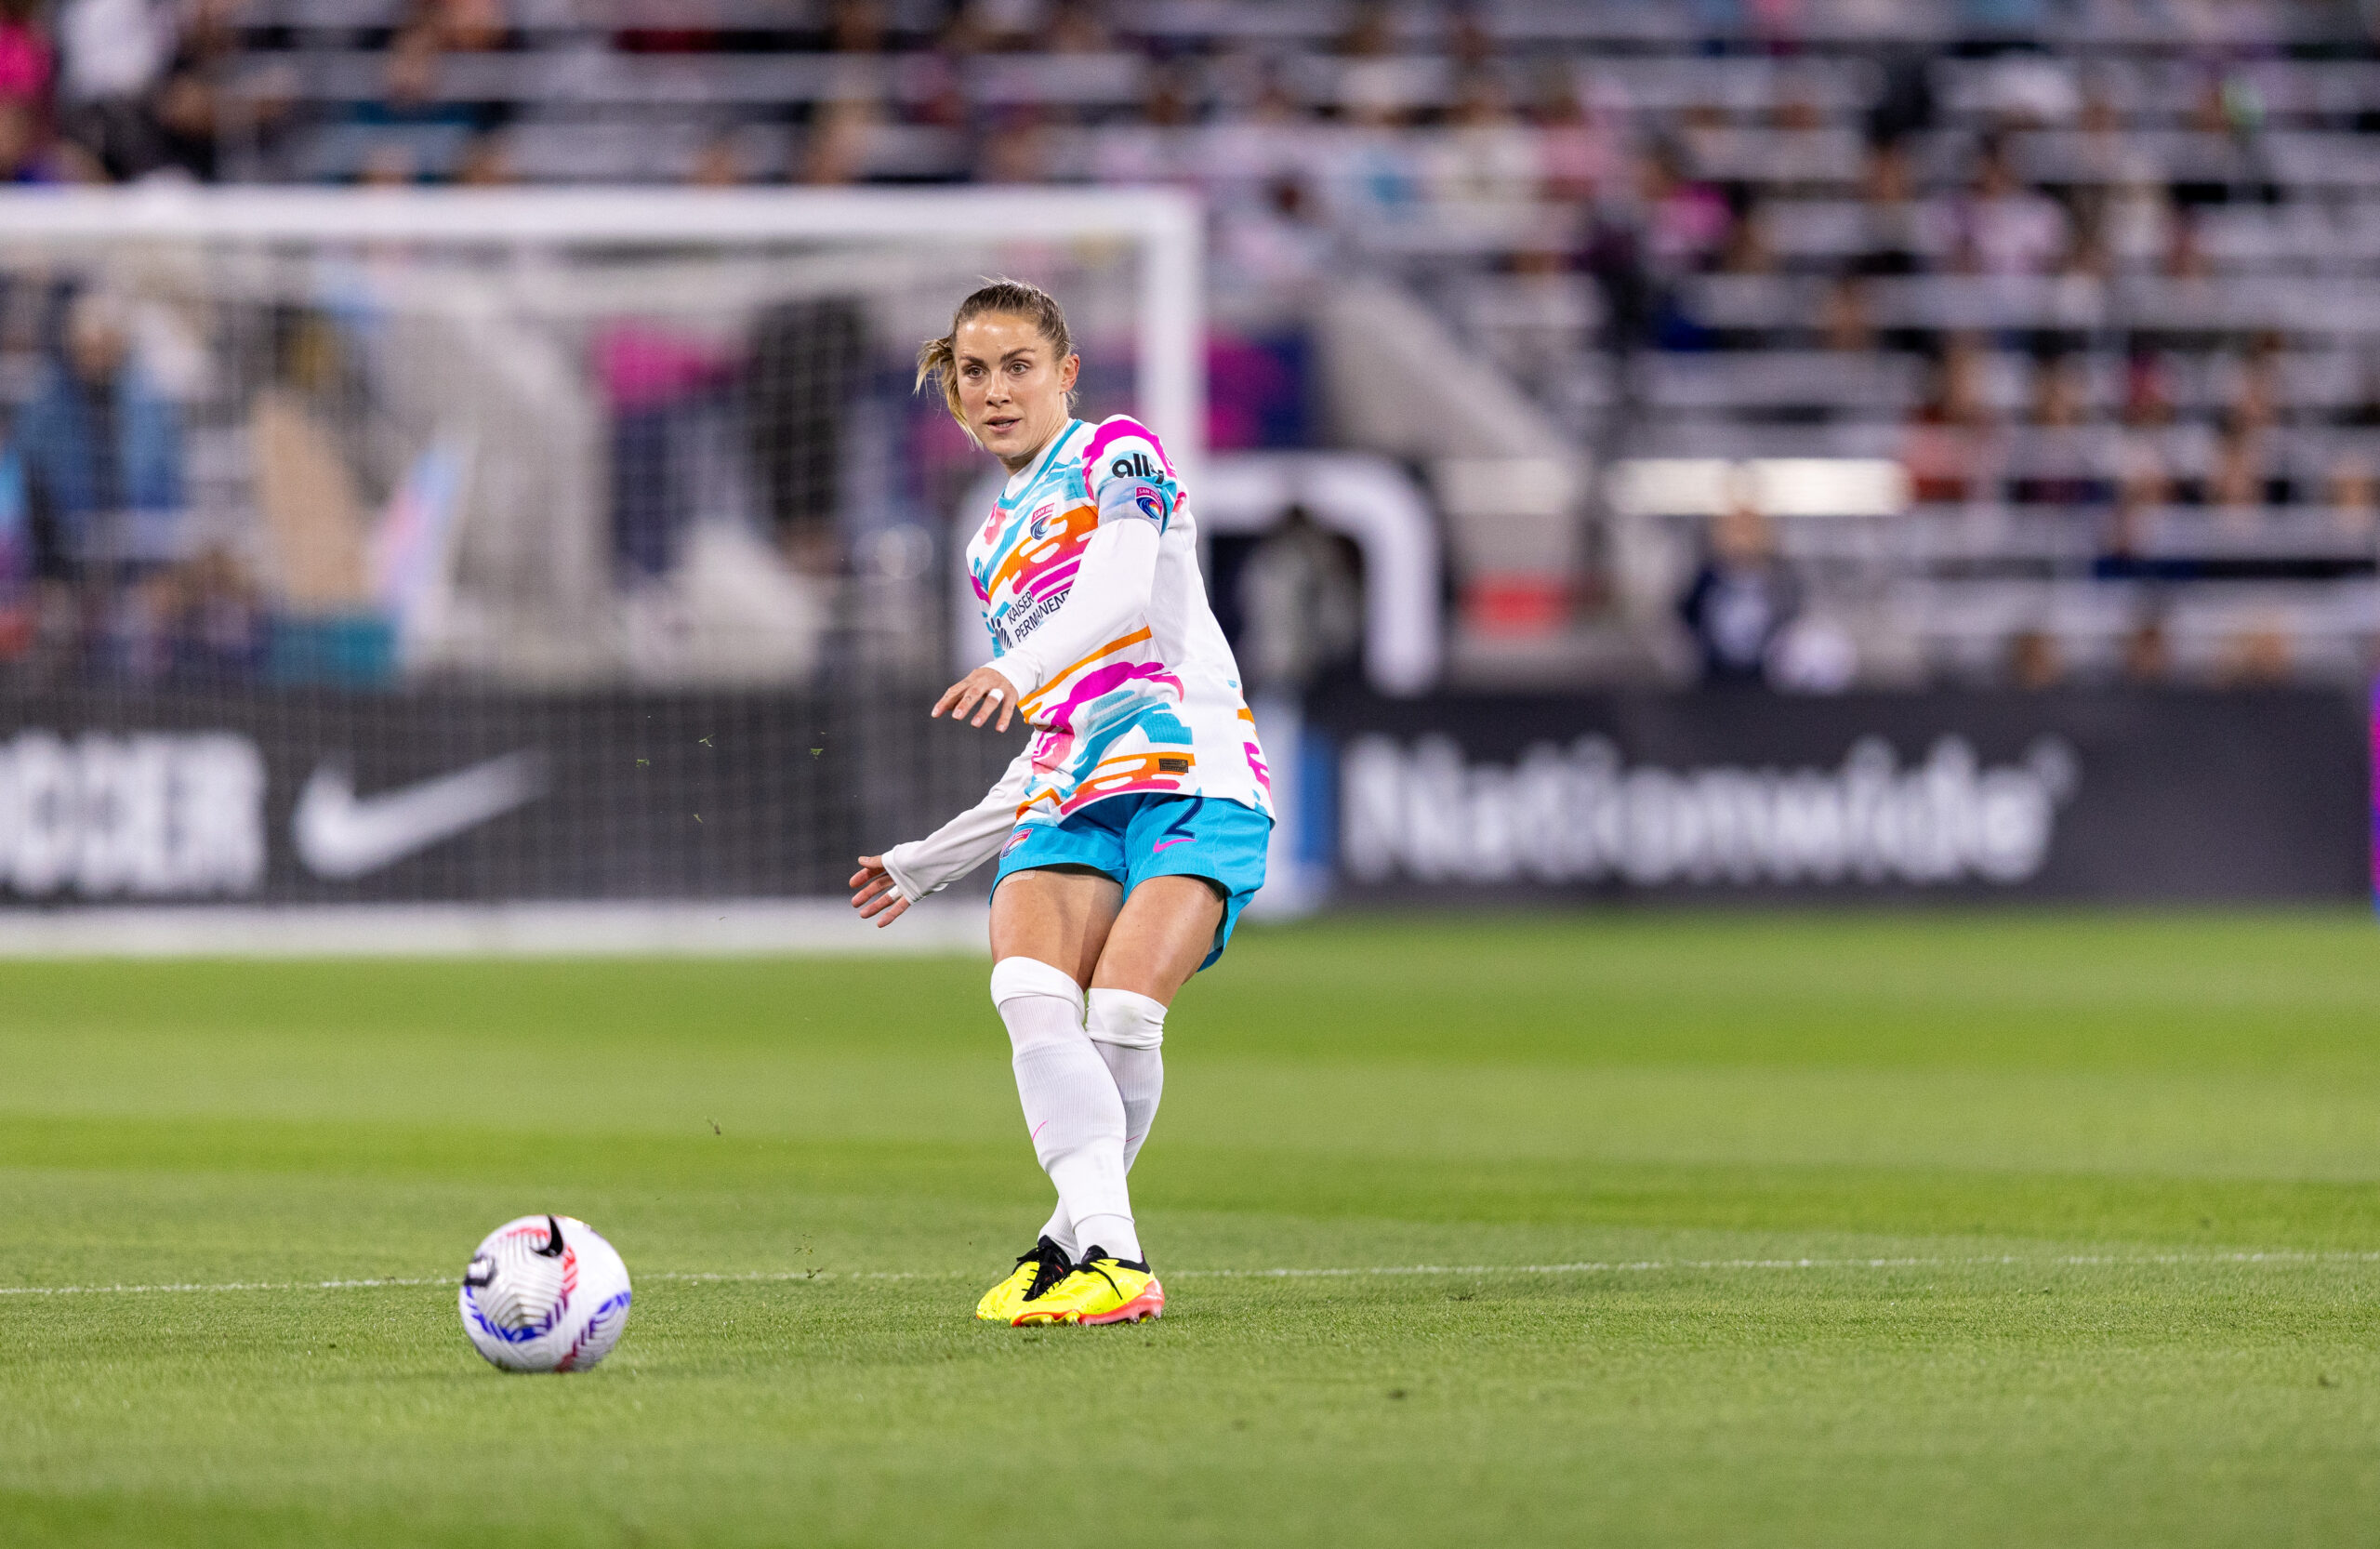 San Diego Wave FC vs. Orlando Pride Preview: Players to Watch & Match Details